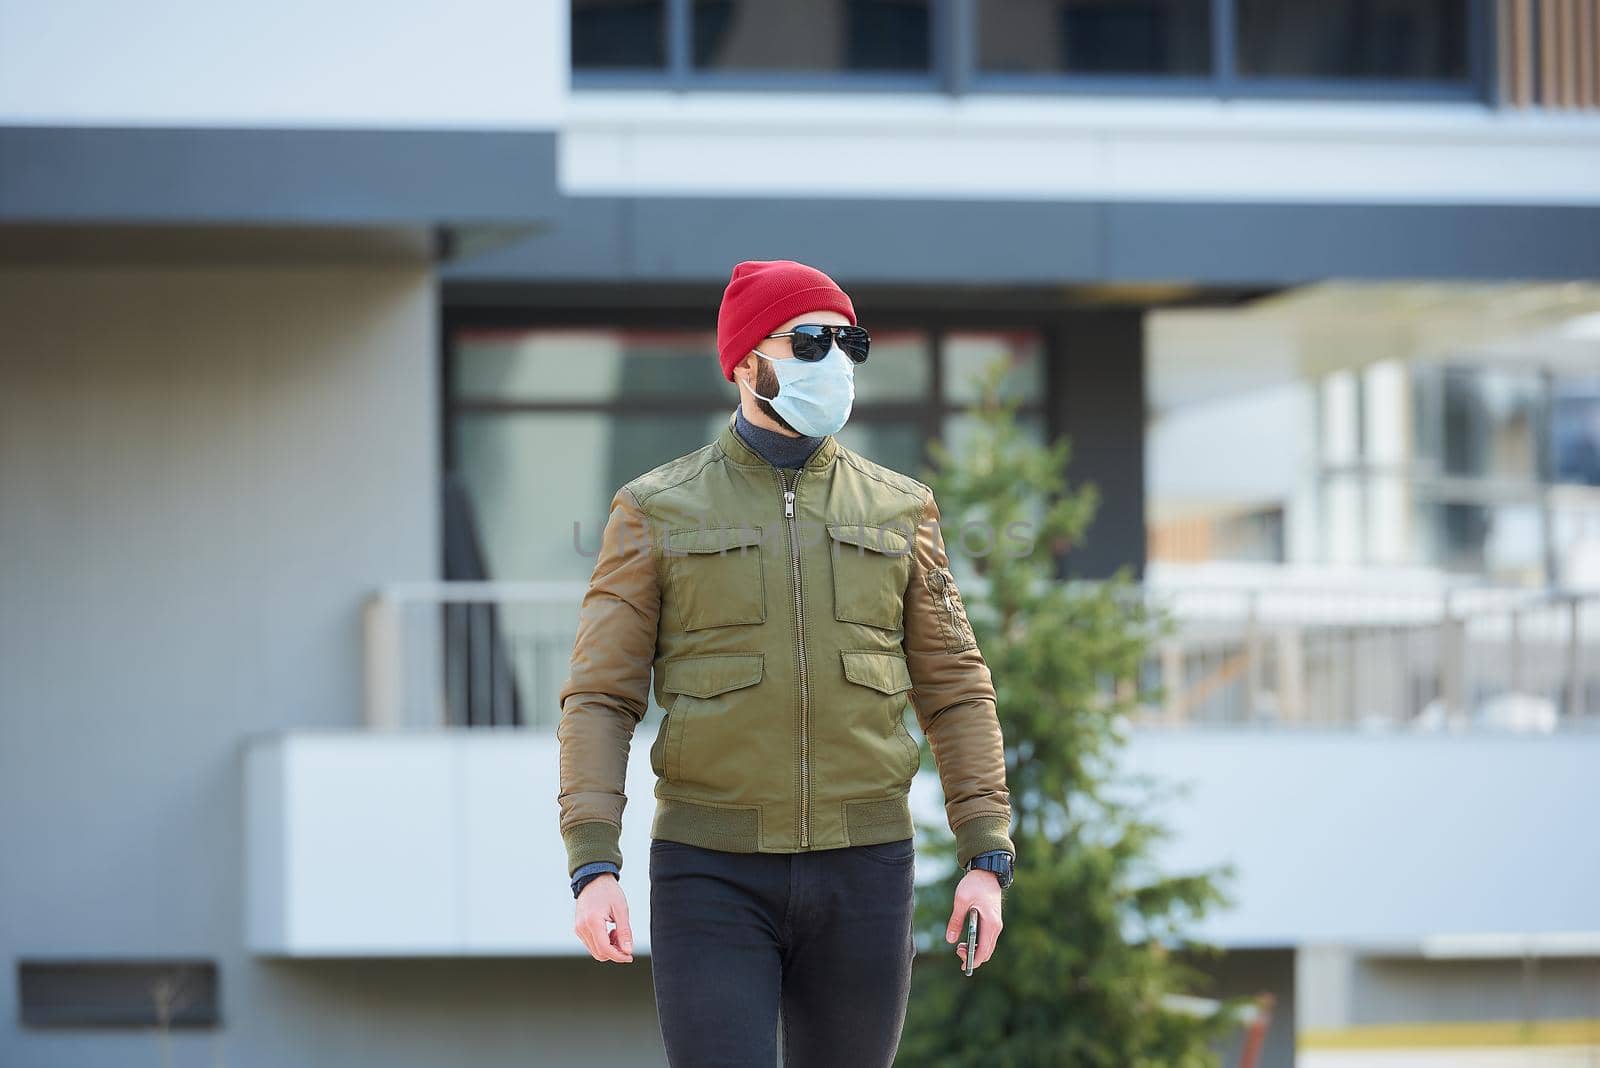 A man in a medical face mask to avoid the spread coronavirus holding his smartphone in a cozy street. A guy standing wears a red cap, sunglasses, and a face mask against COVID 19.